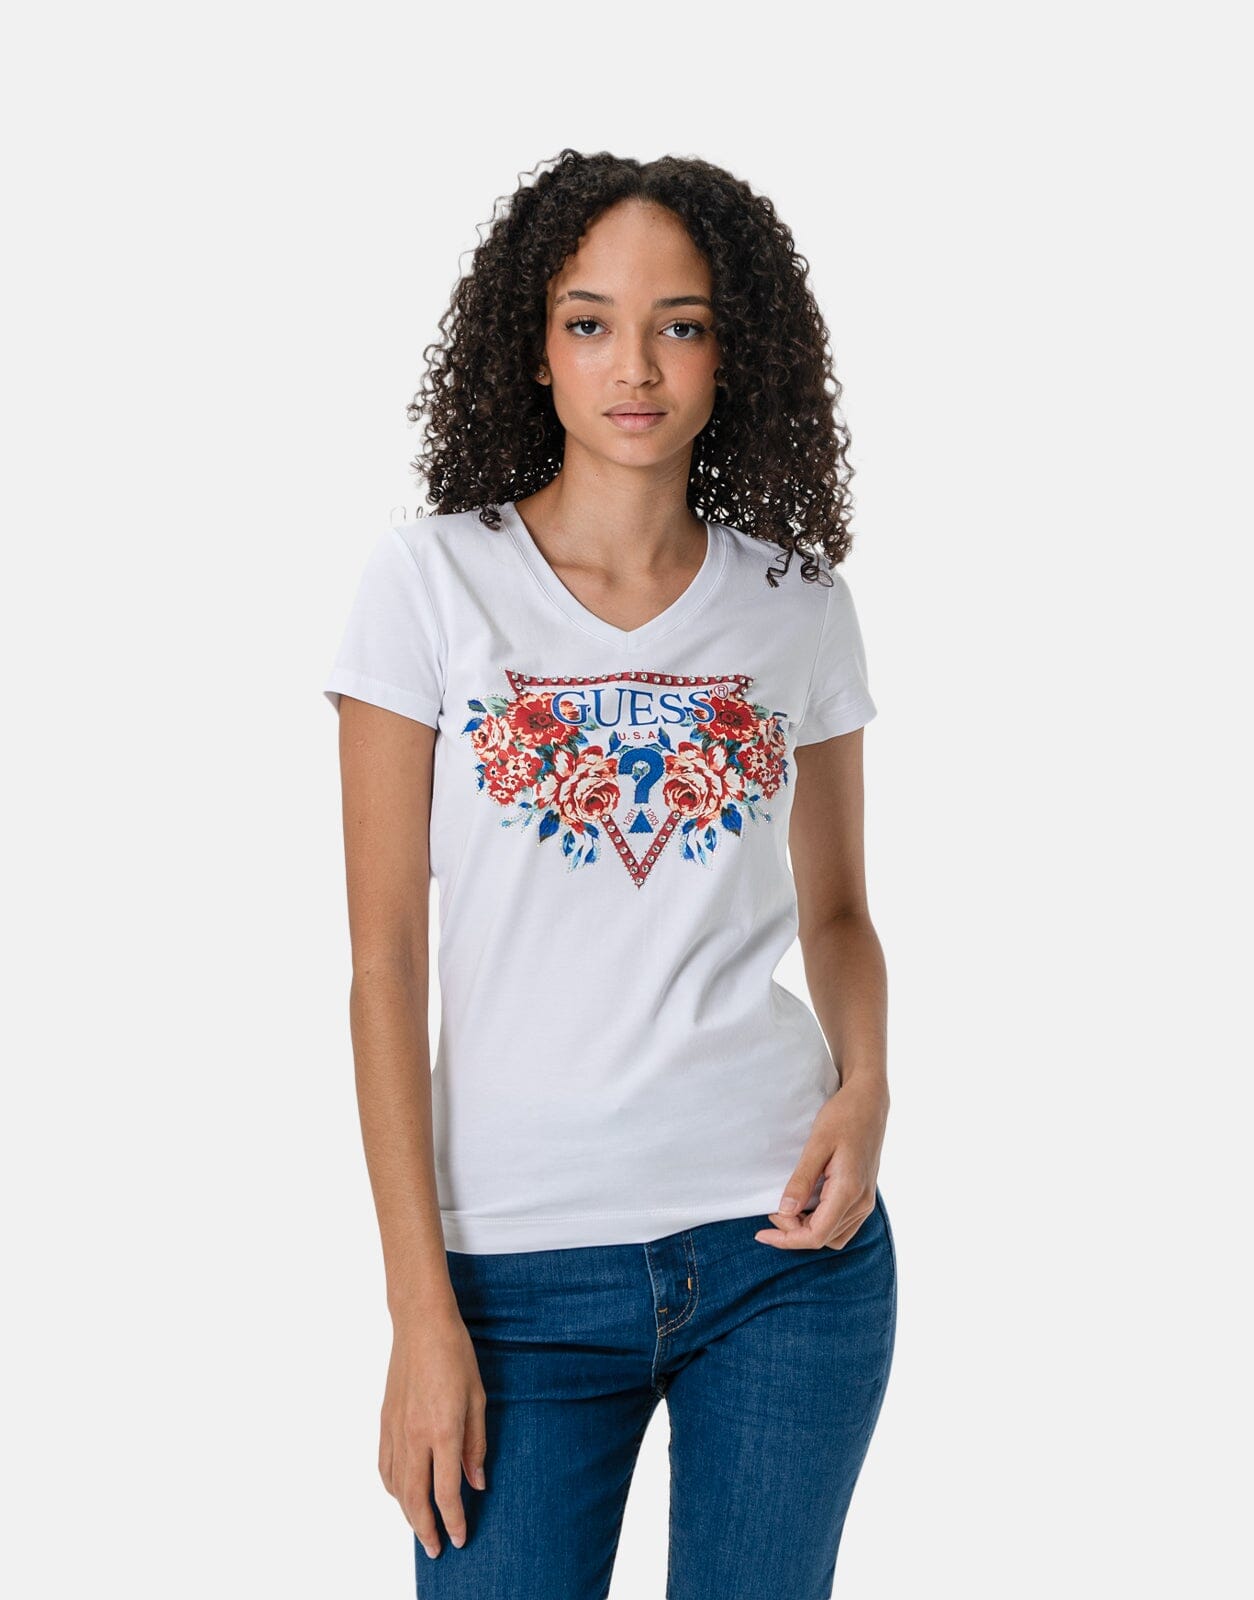 Guess Roses Triangle T-Shirt - Subwear